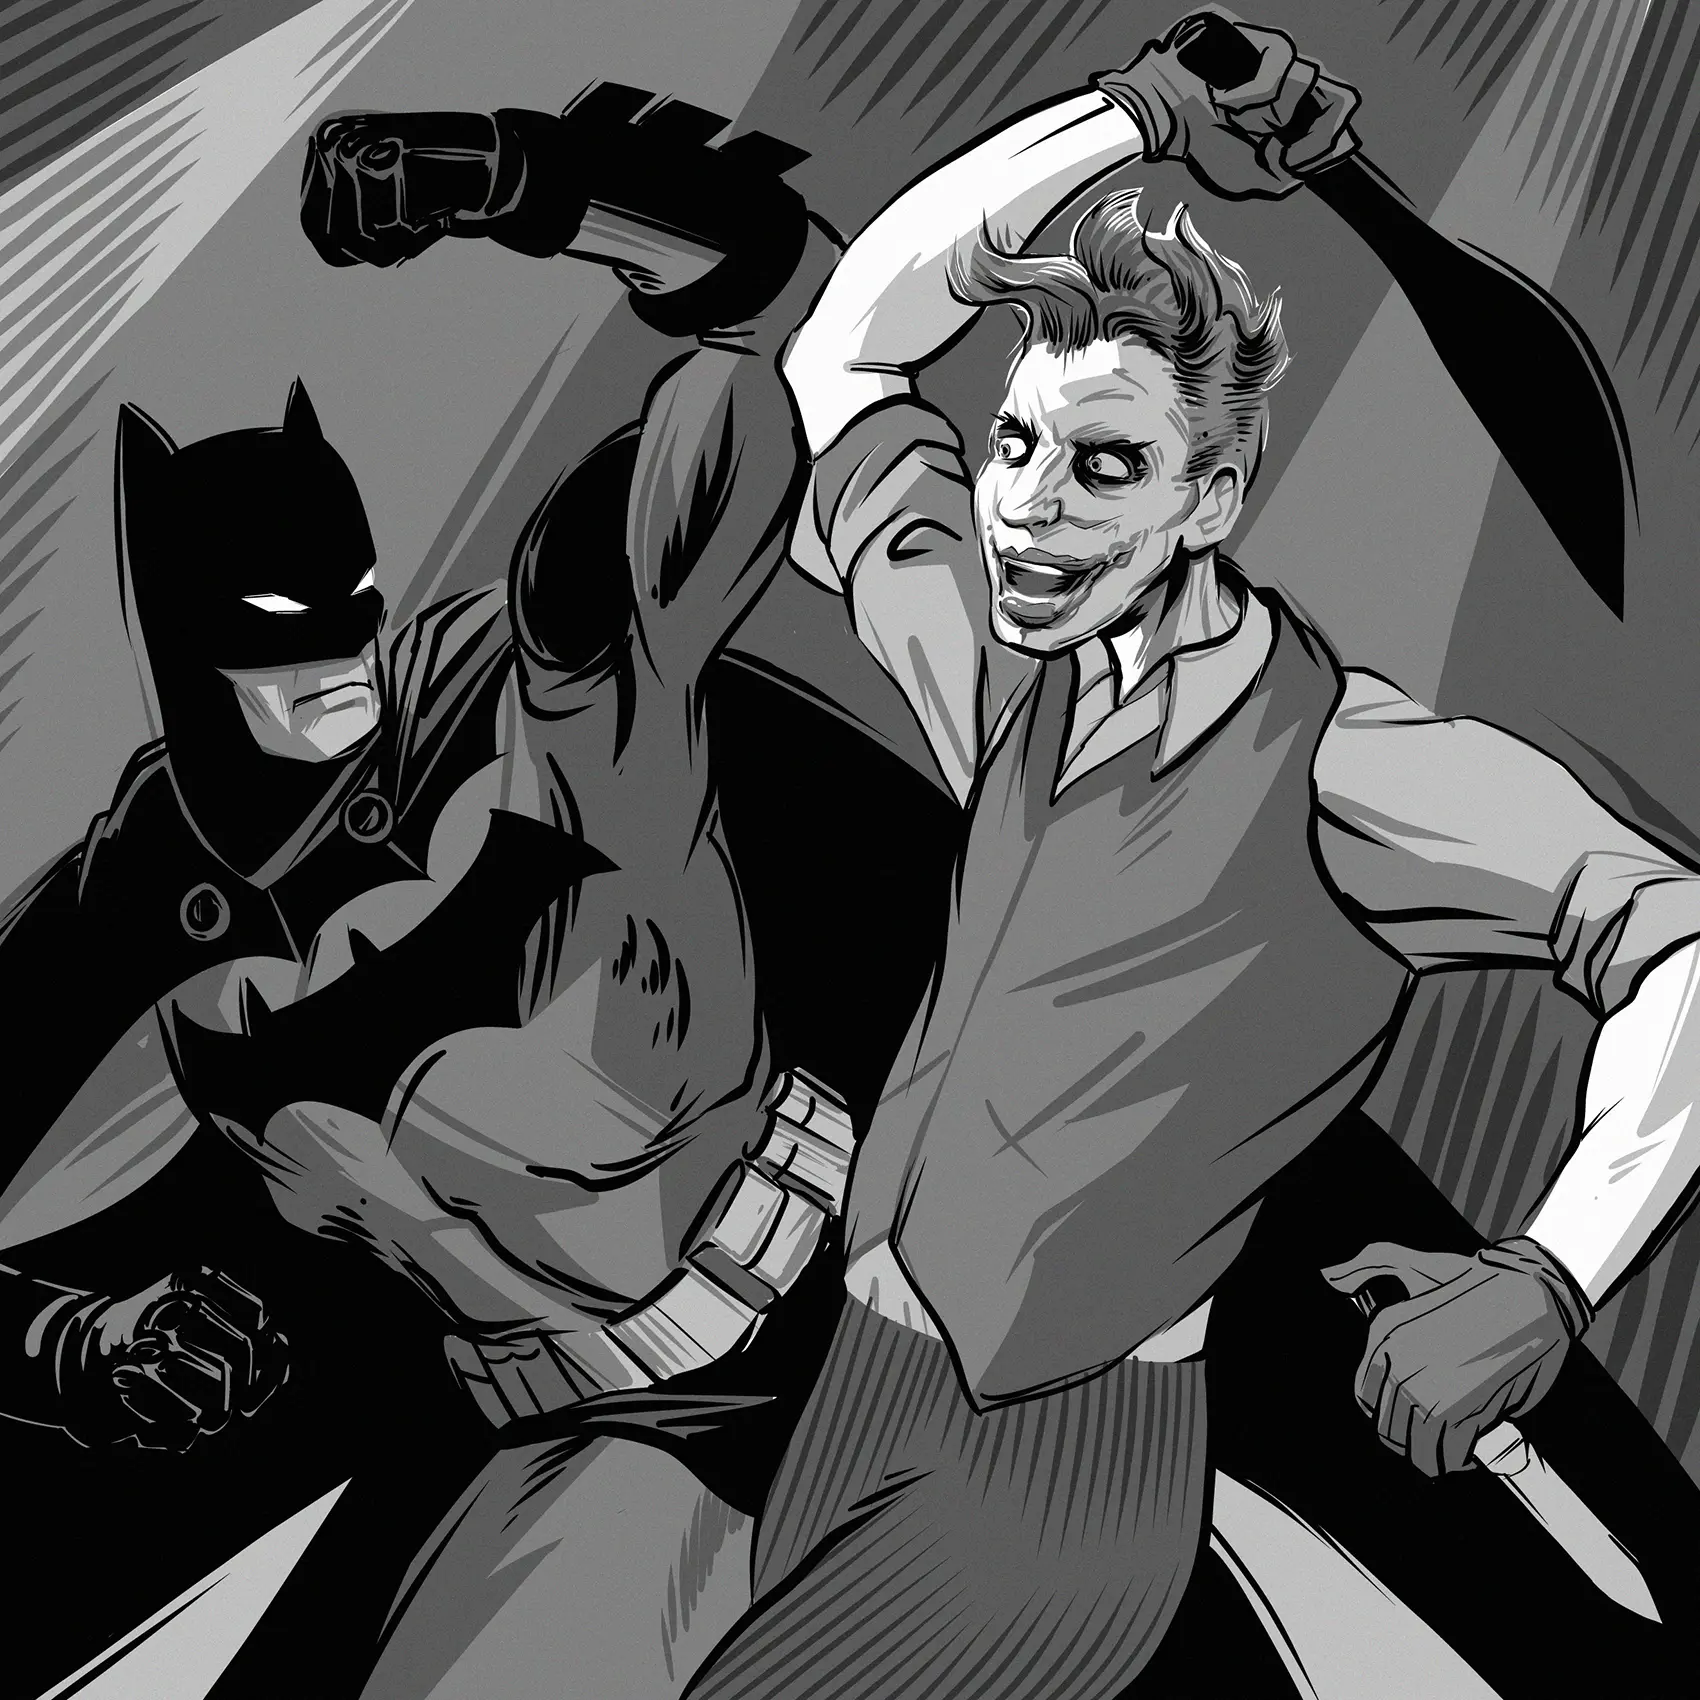 The Joker brings knives to a Utility Belt fight.